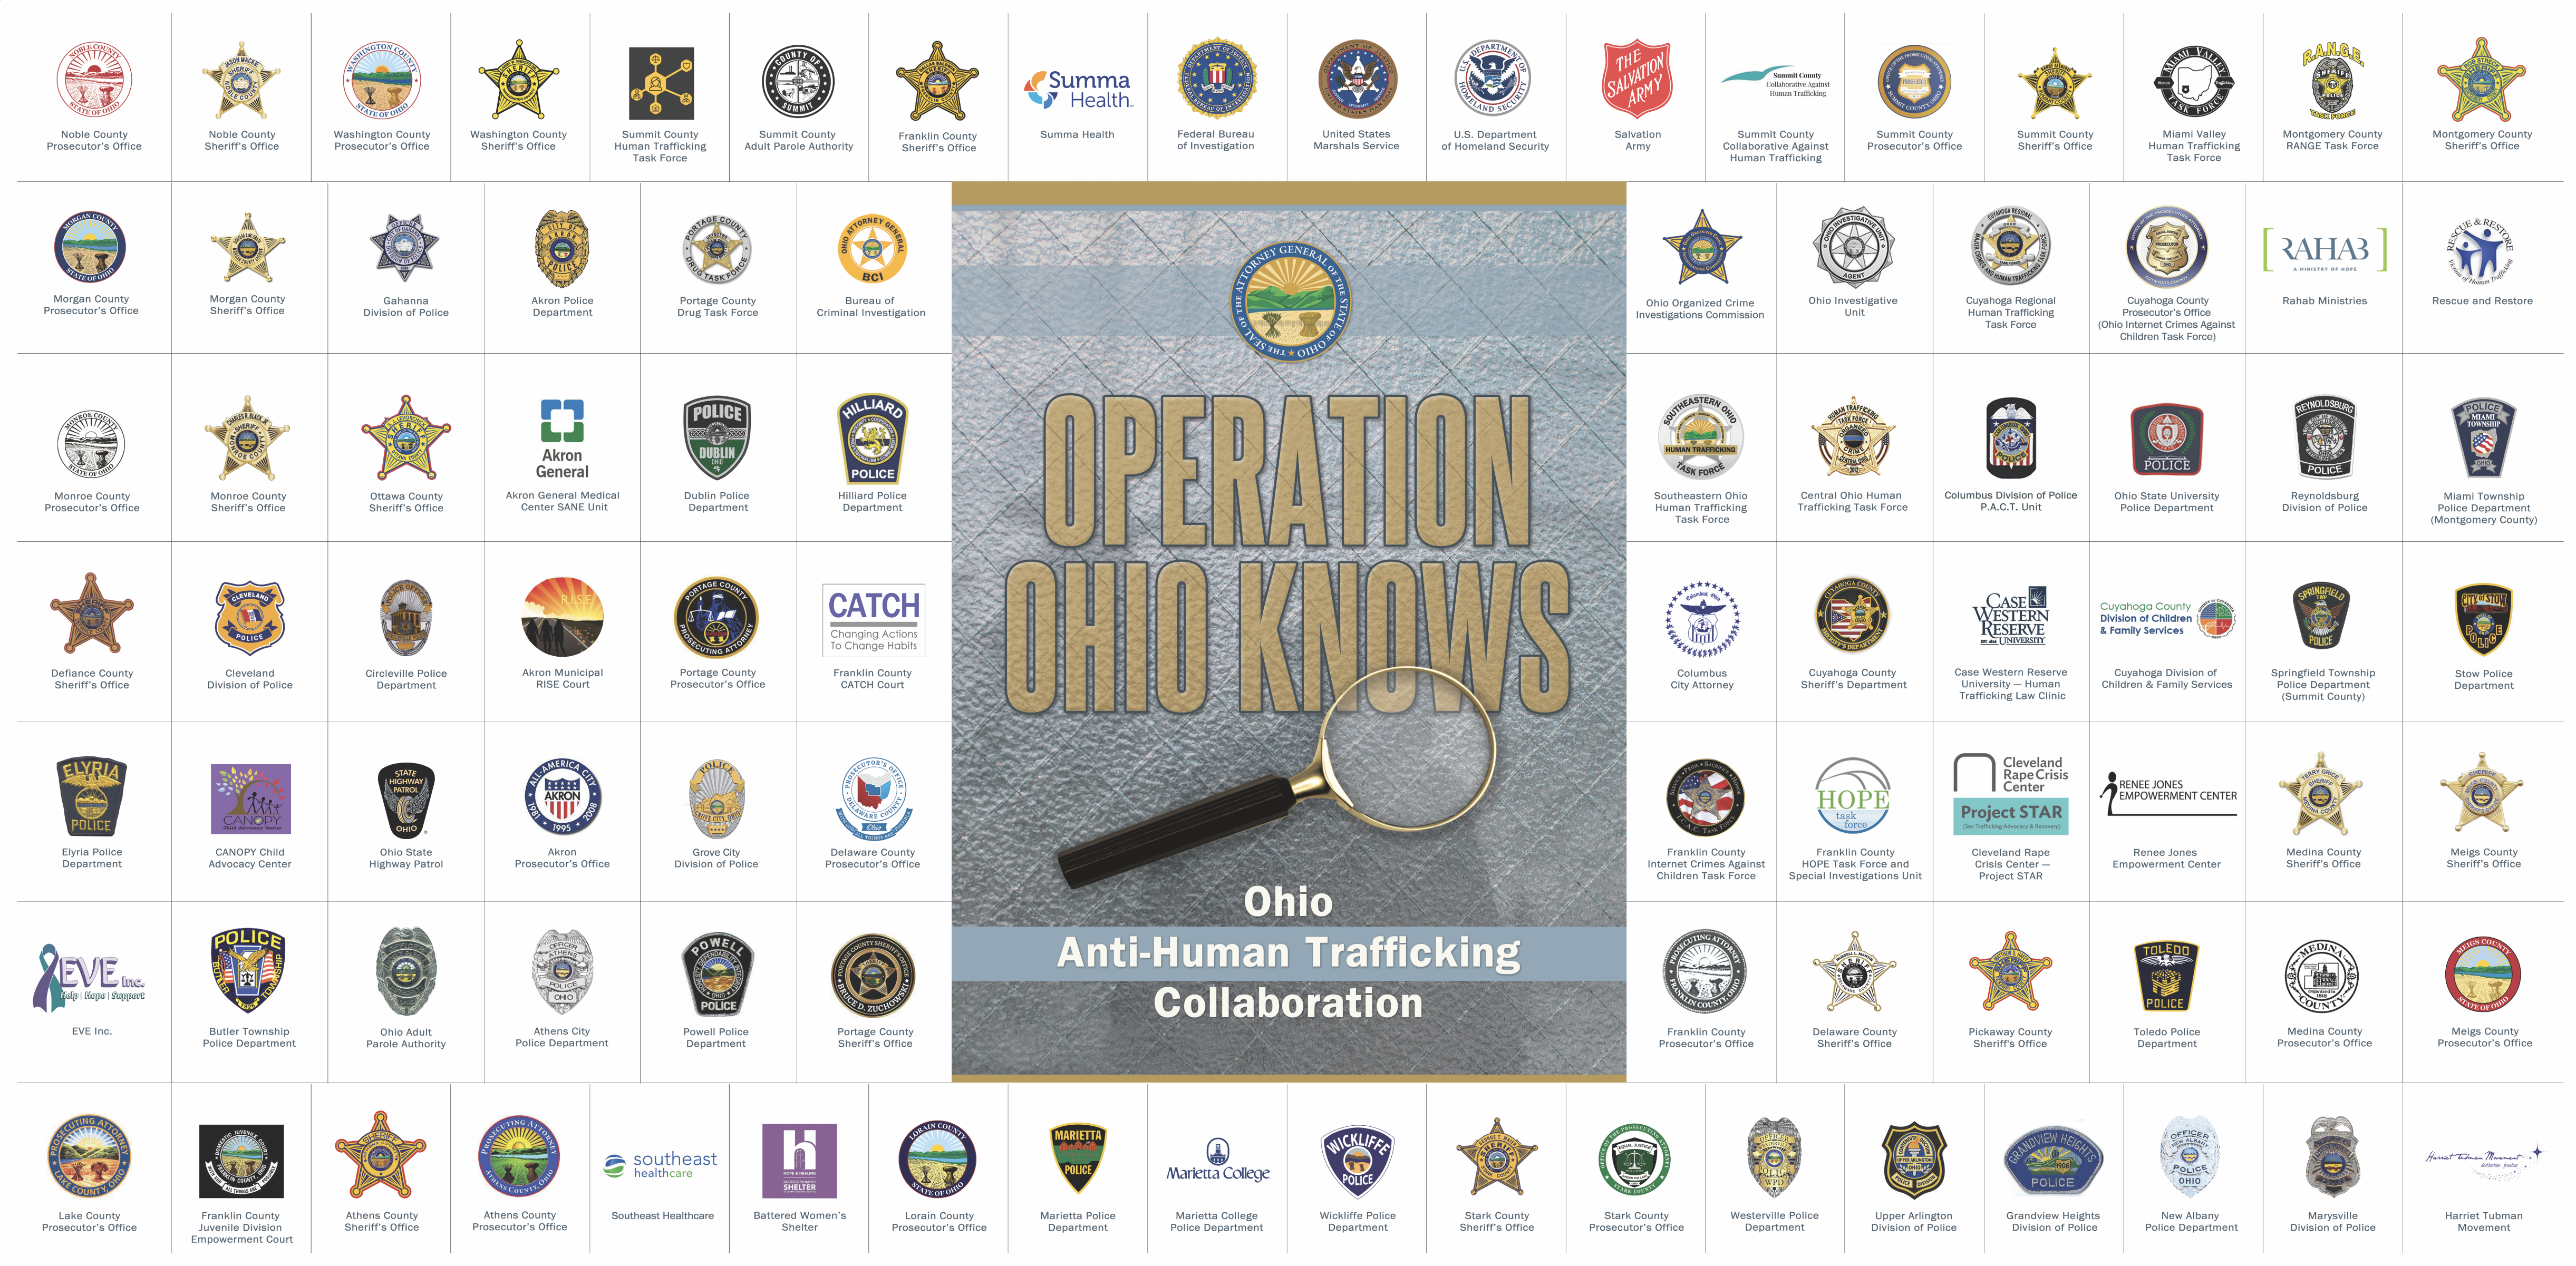 AG Yost talks about Operation Ohio Knows